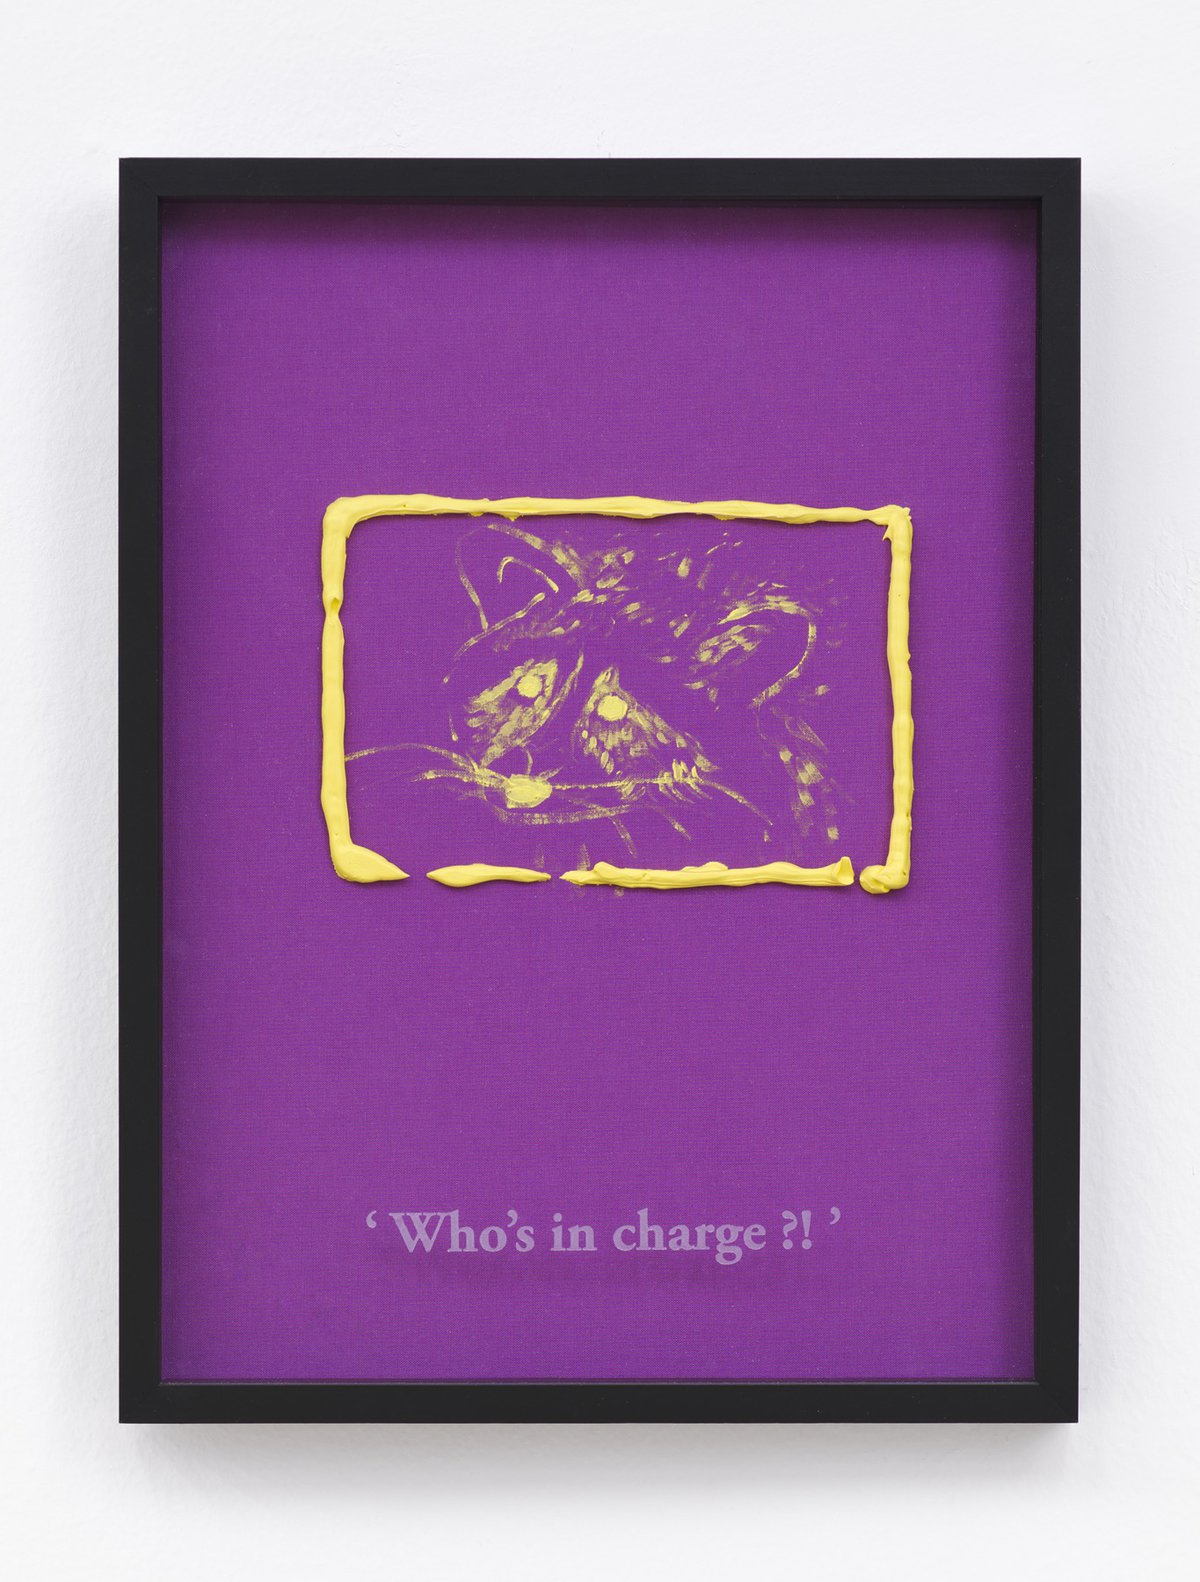 Philipp Timischl&quot;Who&#x27;s in charge?!&quot; (Magenta/Cadmium Yellow Light), 2017Acrylic on linen and glass-engraved object frame40.1 x 32.1 cm